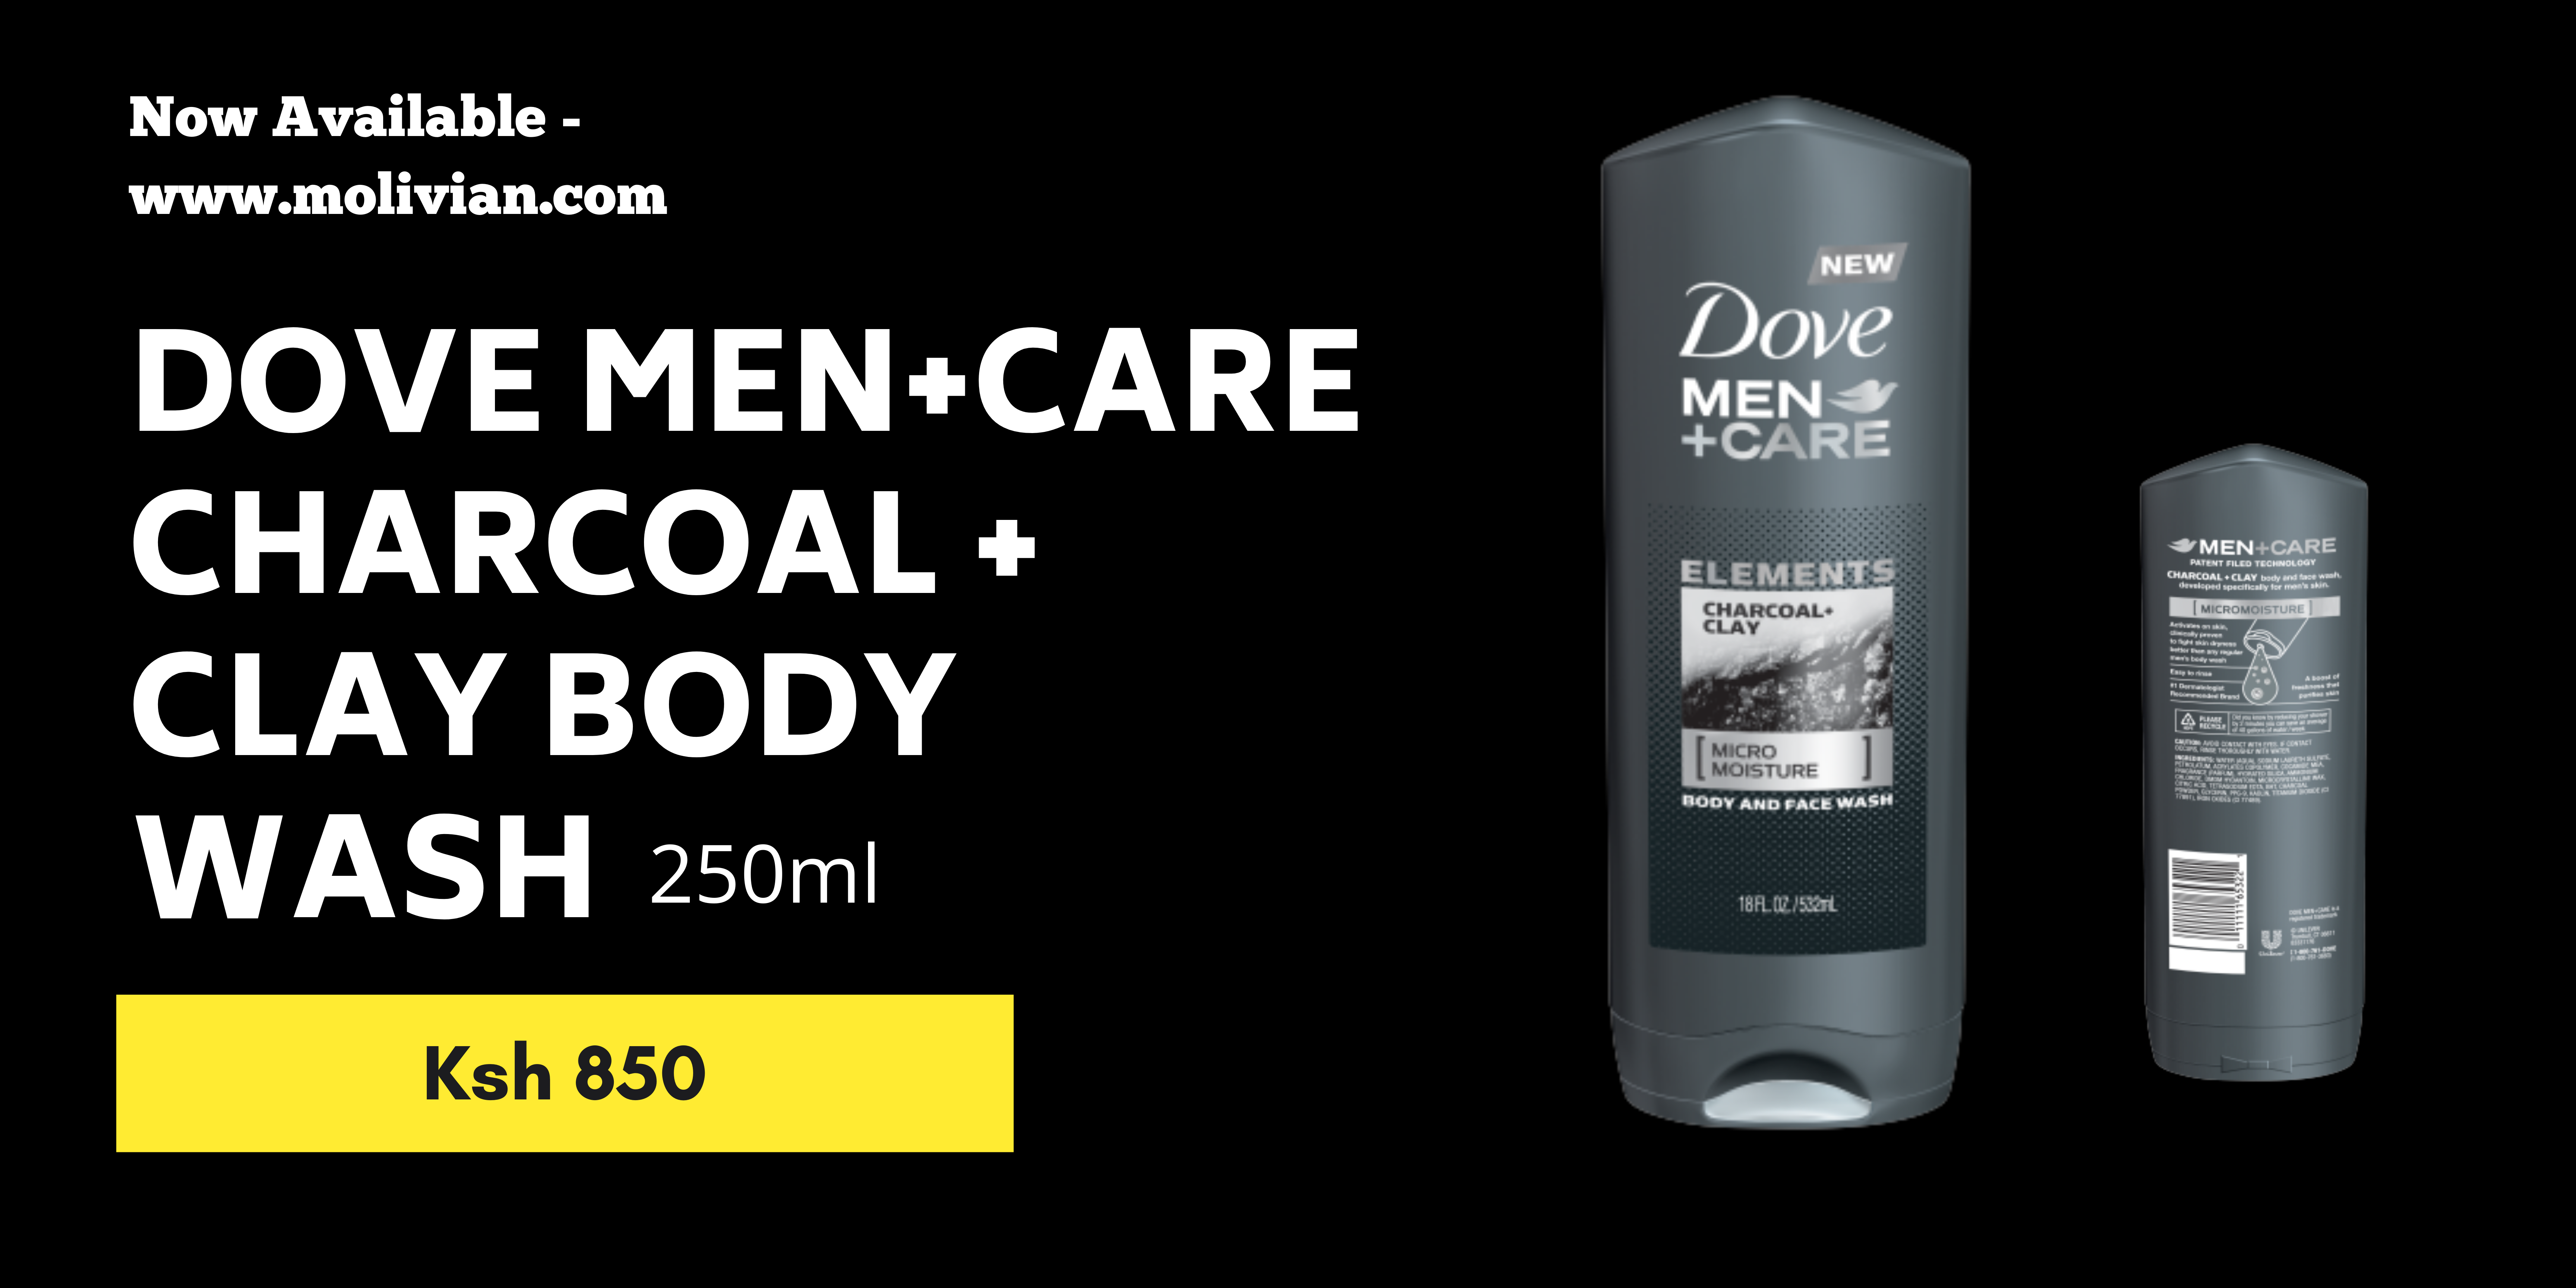 Dove Men+Care Charcoal + Clay Body Wash